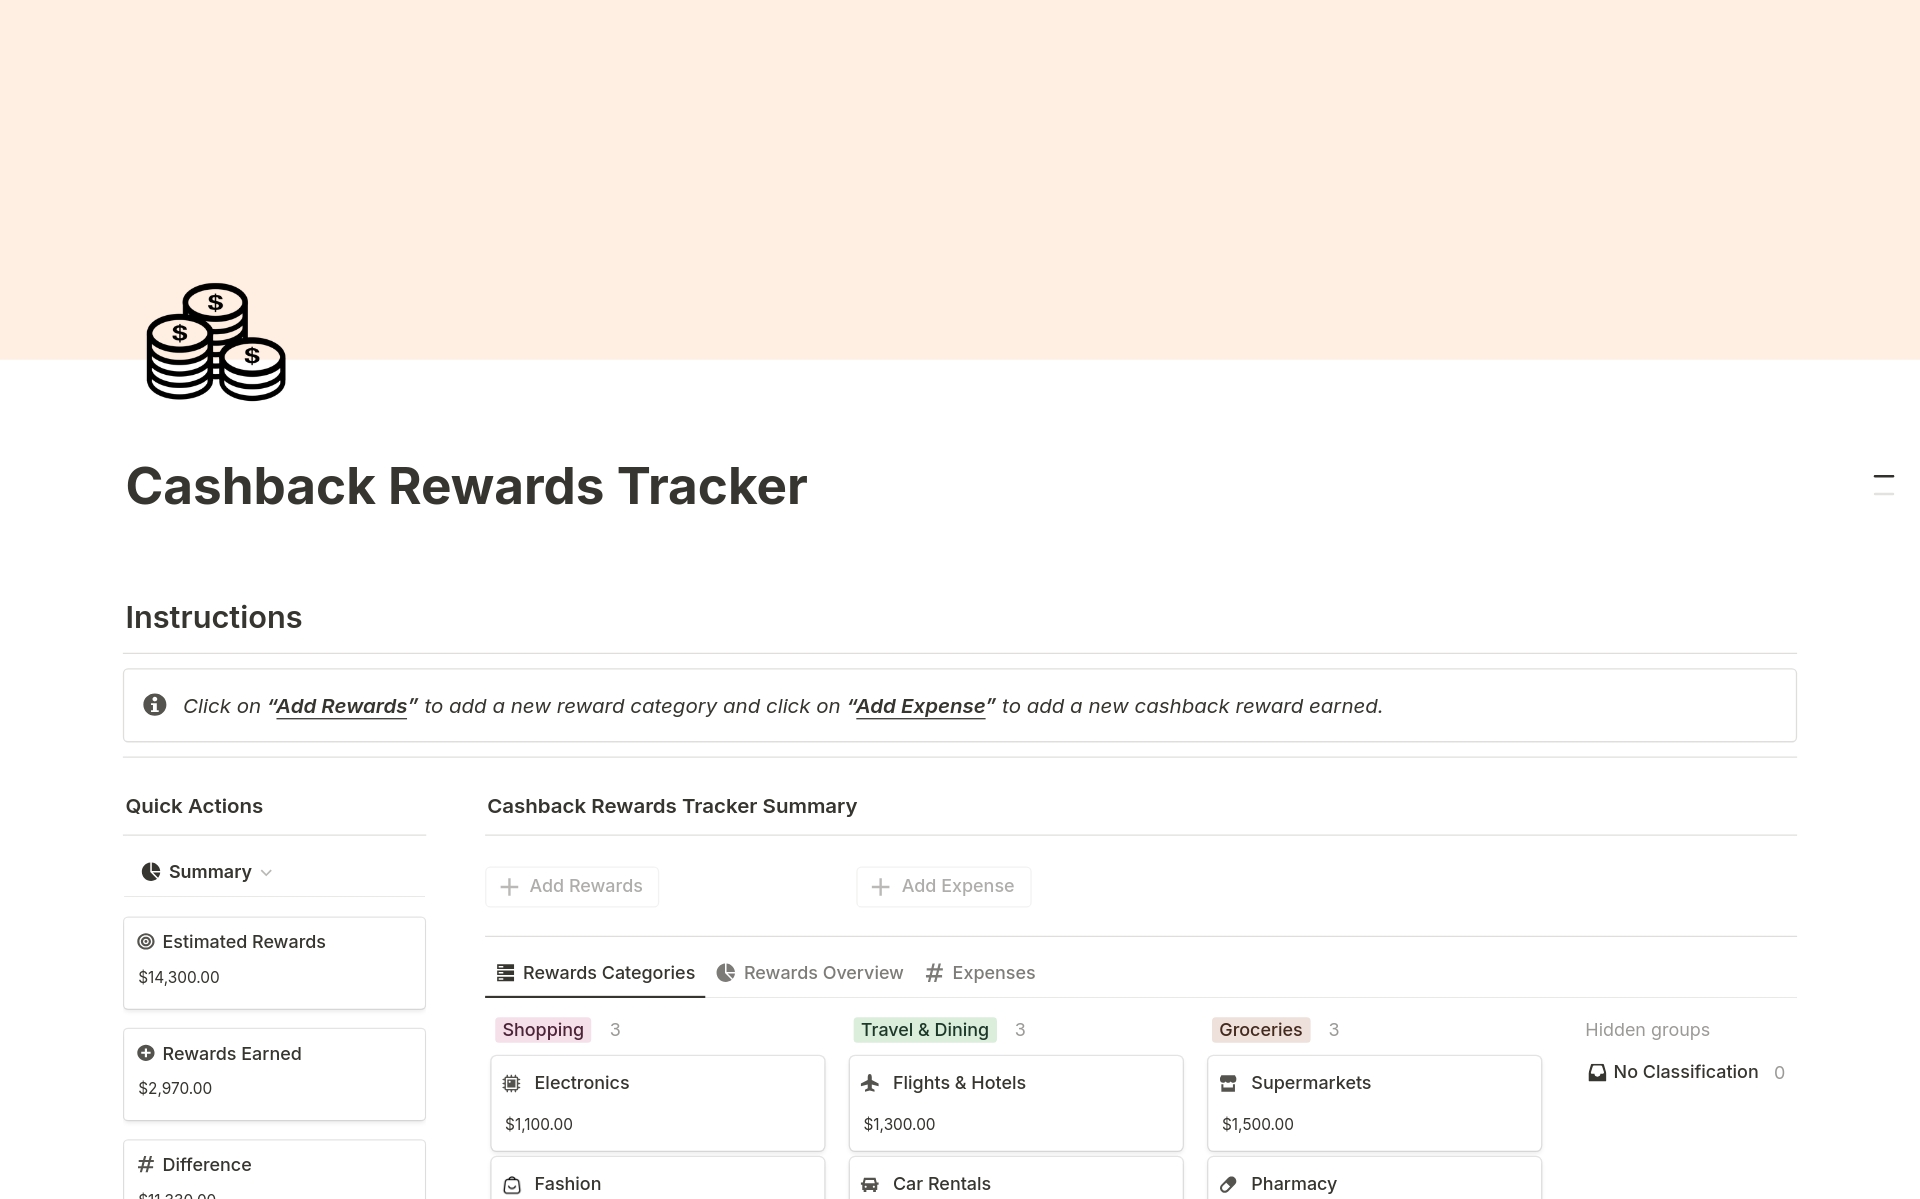 Ideal for those who are looking to keep track of their cashback rewards, this tracker helps you keep track of cashback such as shopping, travel & dining, groceries and much more.